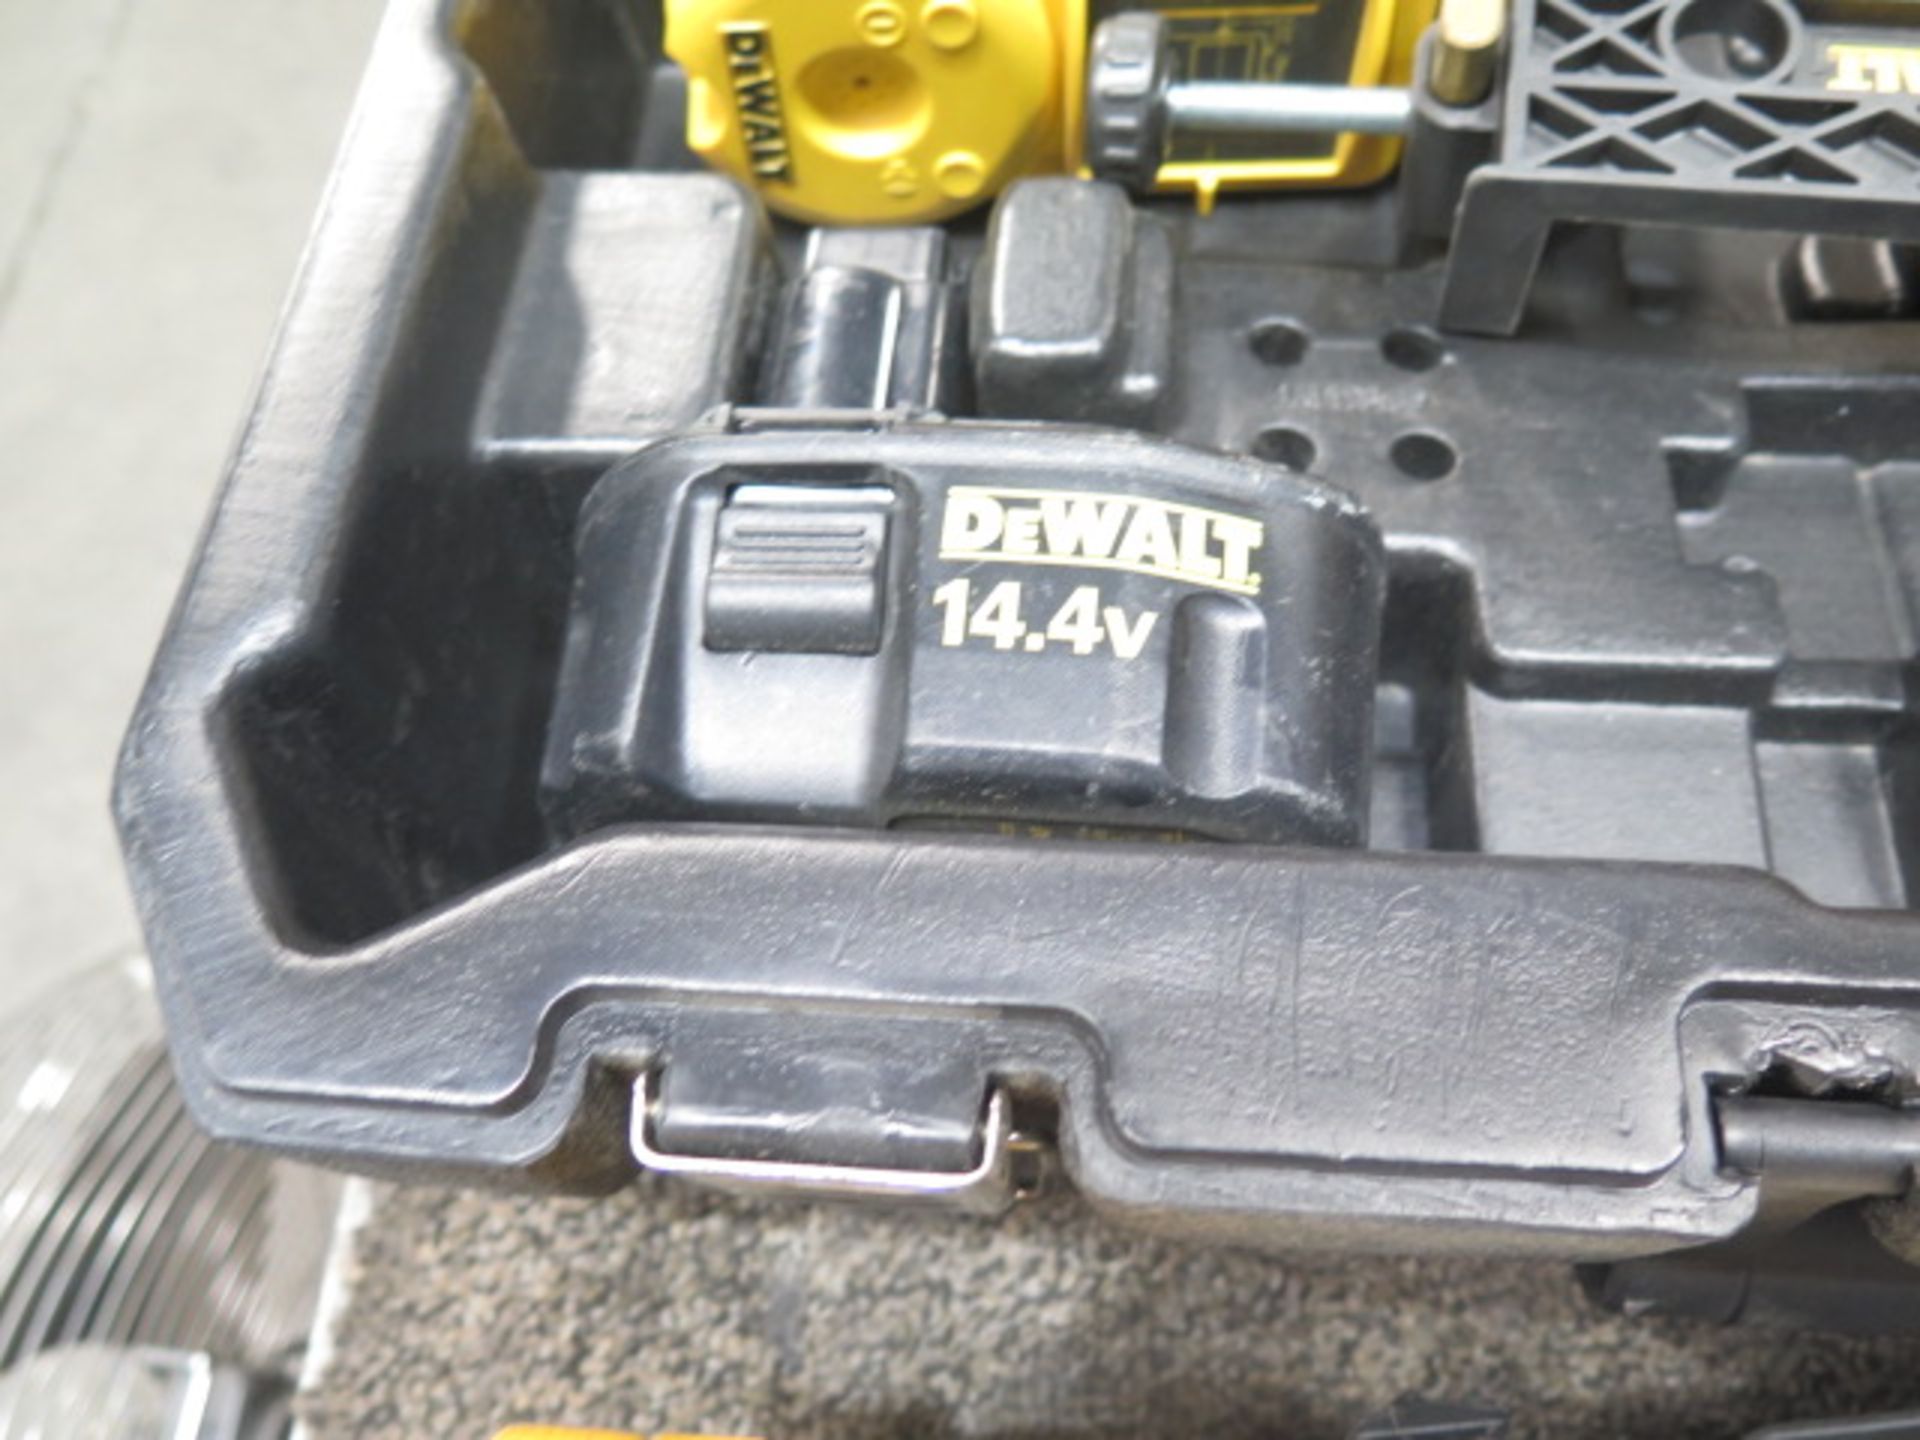 DeWalt mdl. DW073 18V Cordless Rotary Laser w/ Tripod Stand (SOLD AS-IS - NO WARRANTY) - Image 8 of 9